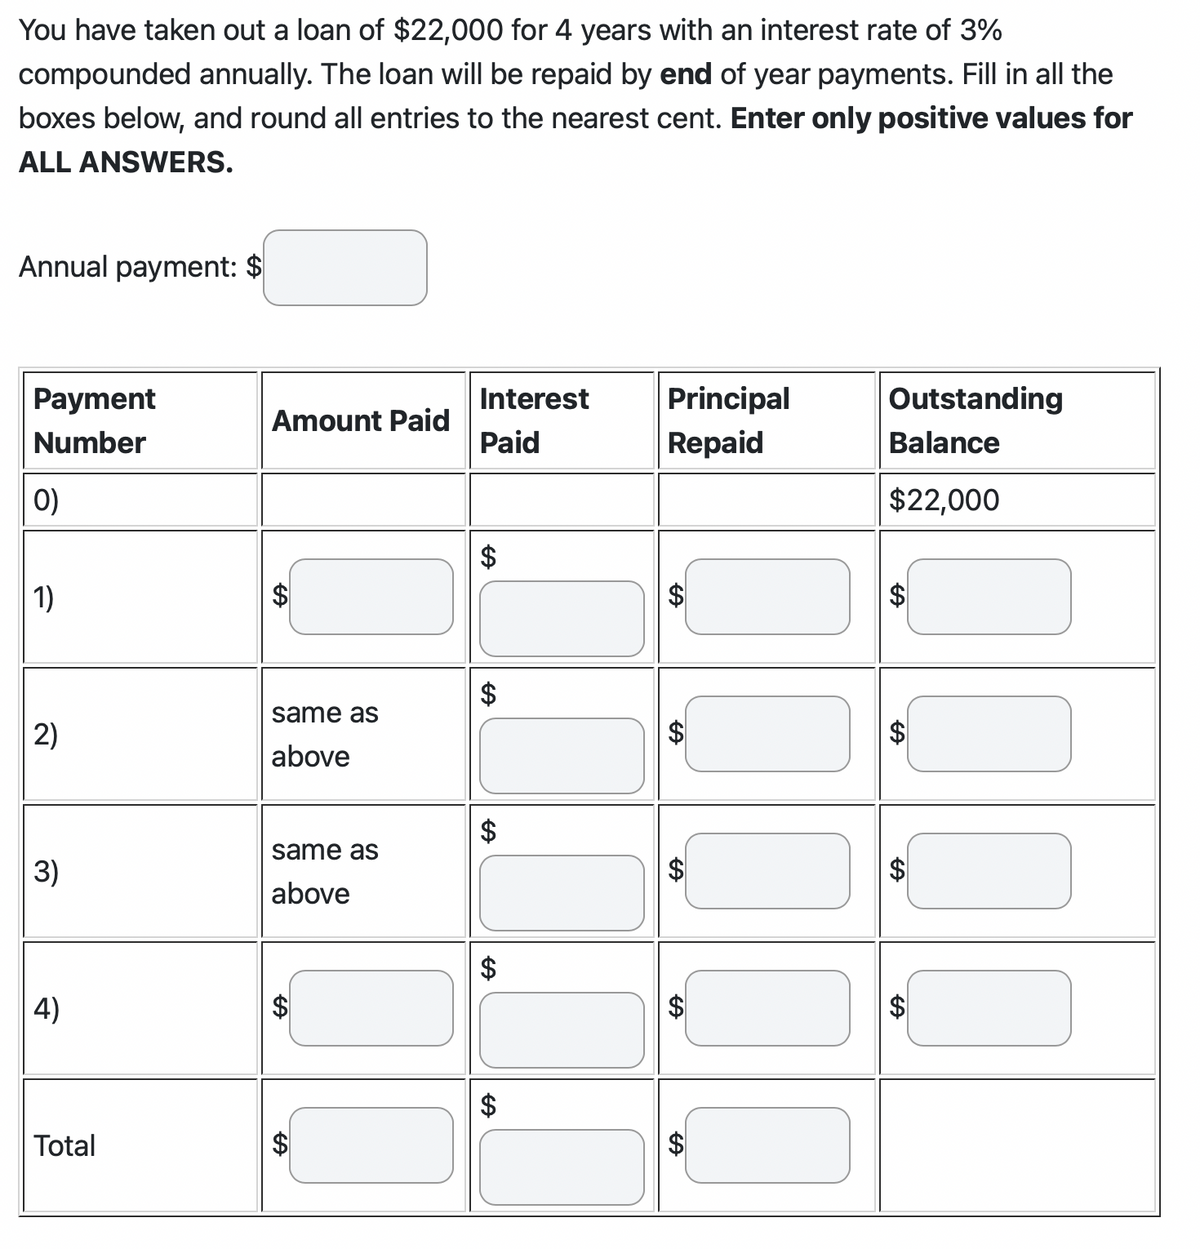 You have taken out a loan of $22,000 for 4 years with an interest rate of 3%
compounded annually. The loan will be repaid by end of year payments. Fill in all the
boxes below, and round all entries to the nearest cent. Enter only positive values for
ALL ANSWERS.
Annual payment: $
Payment
Number
0)
1)
2)
3)
4)
Total
Amount Paid
SA
same as
above
same as
above
A
A
Interest
Paid
EA
A
Principal
Repaid
A
A
SA
A
A
Outstanding
Balance
$22,000
$
00
000
A
A